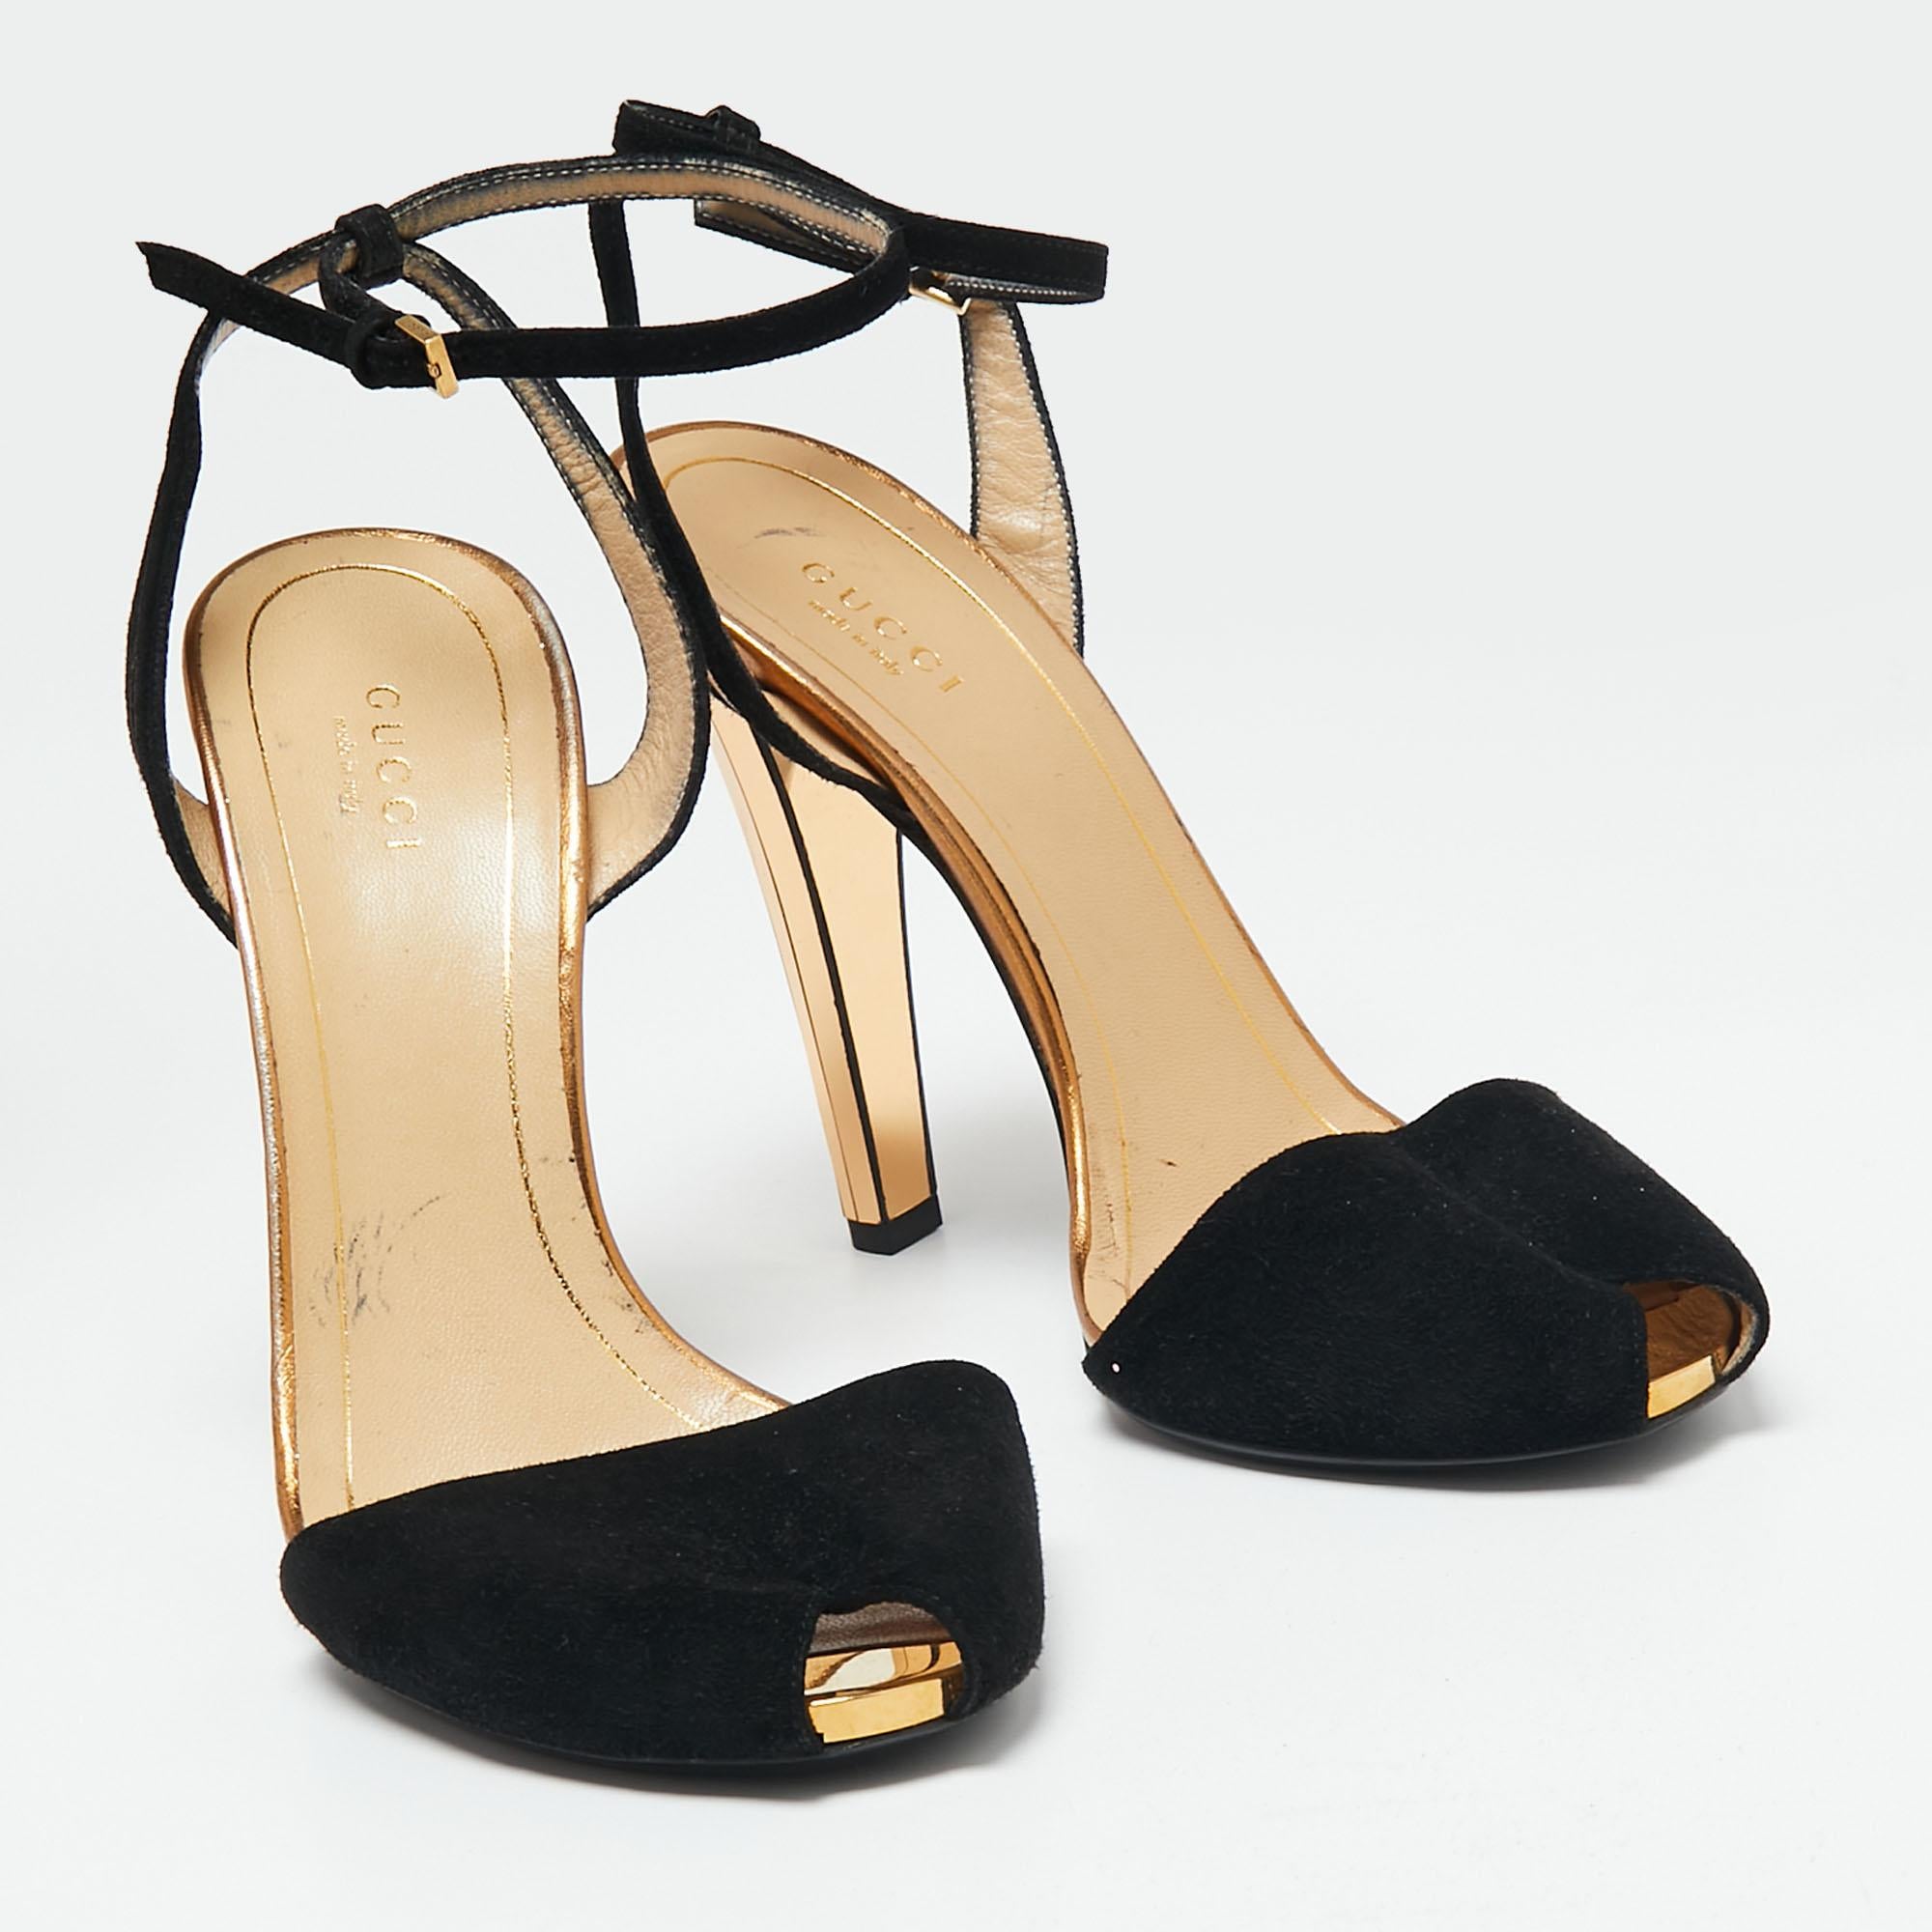 Gucci Black/Gold Suede Peep Toe Ankle Strap Sandals Size 38 3